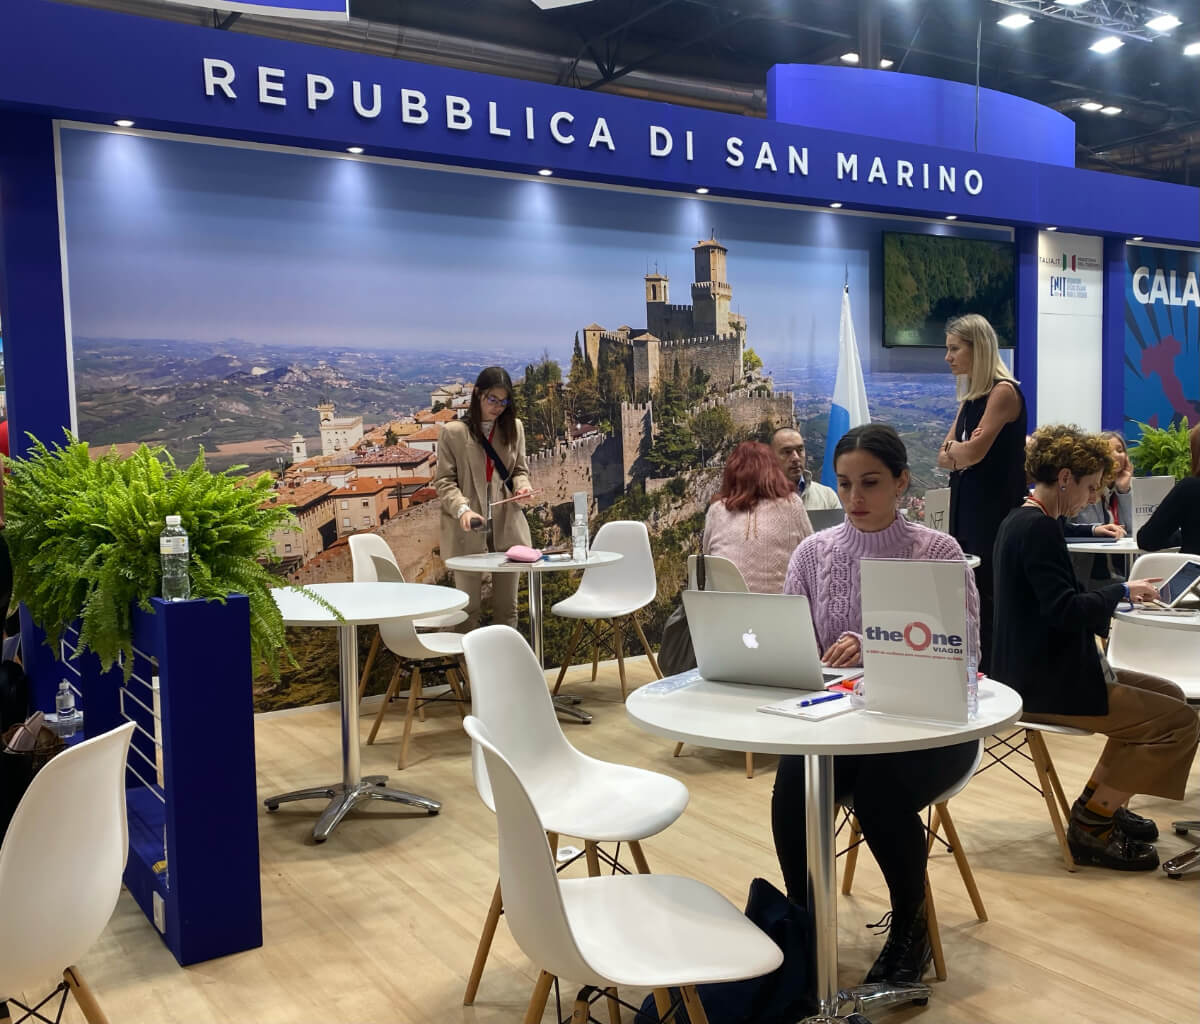 Great success for the Republic of San Marino at the Madrid International Fair